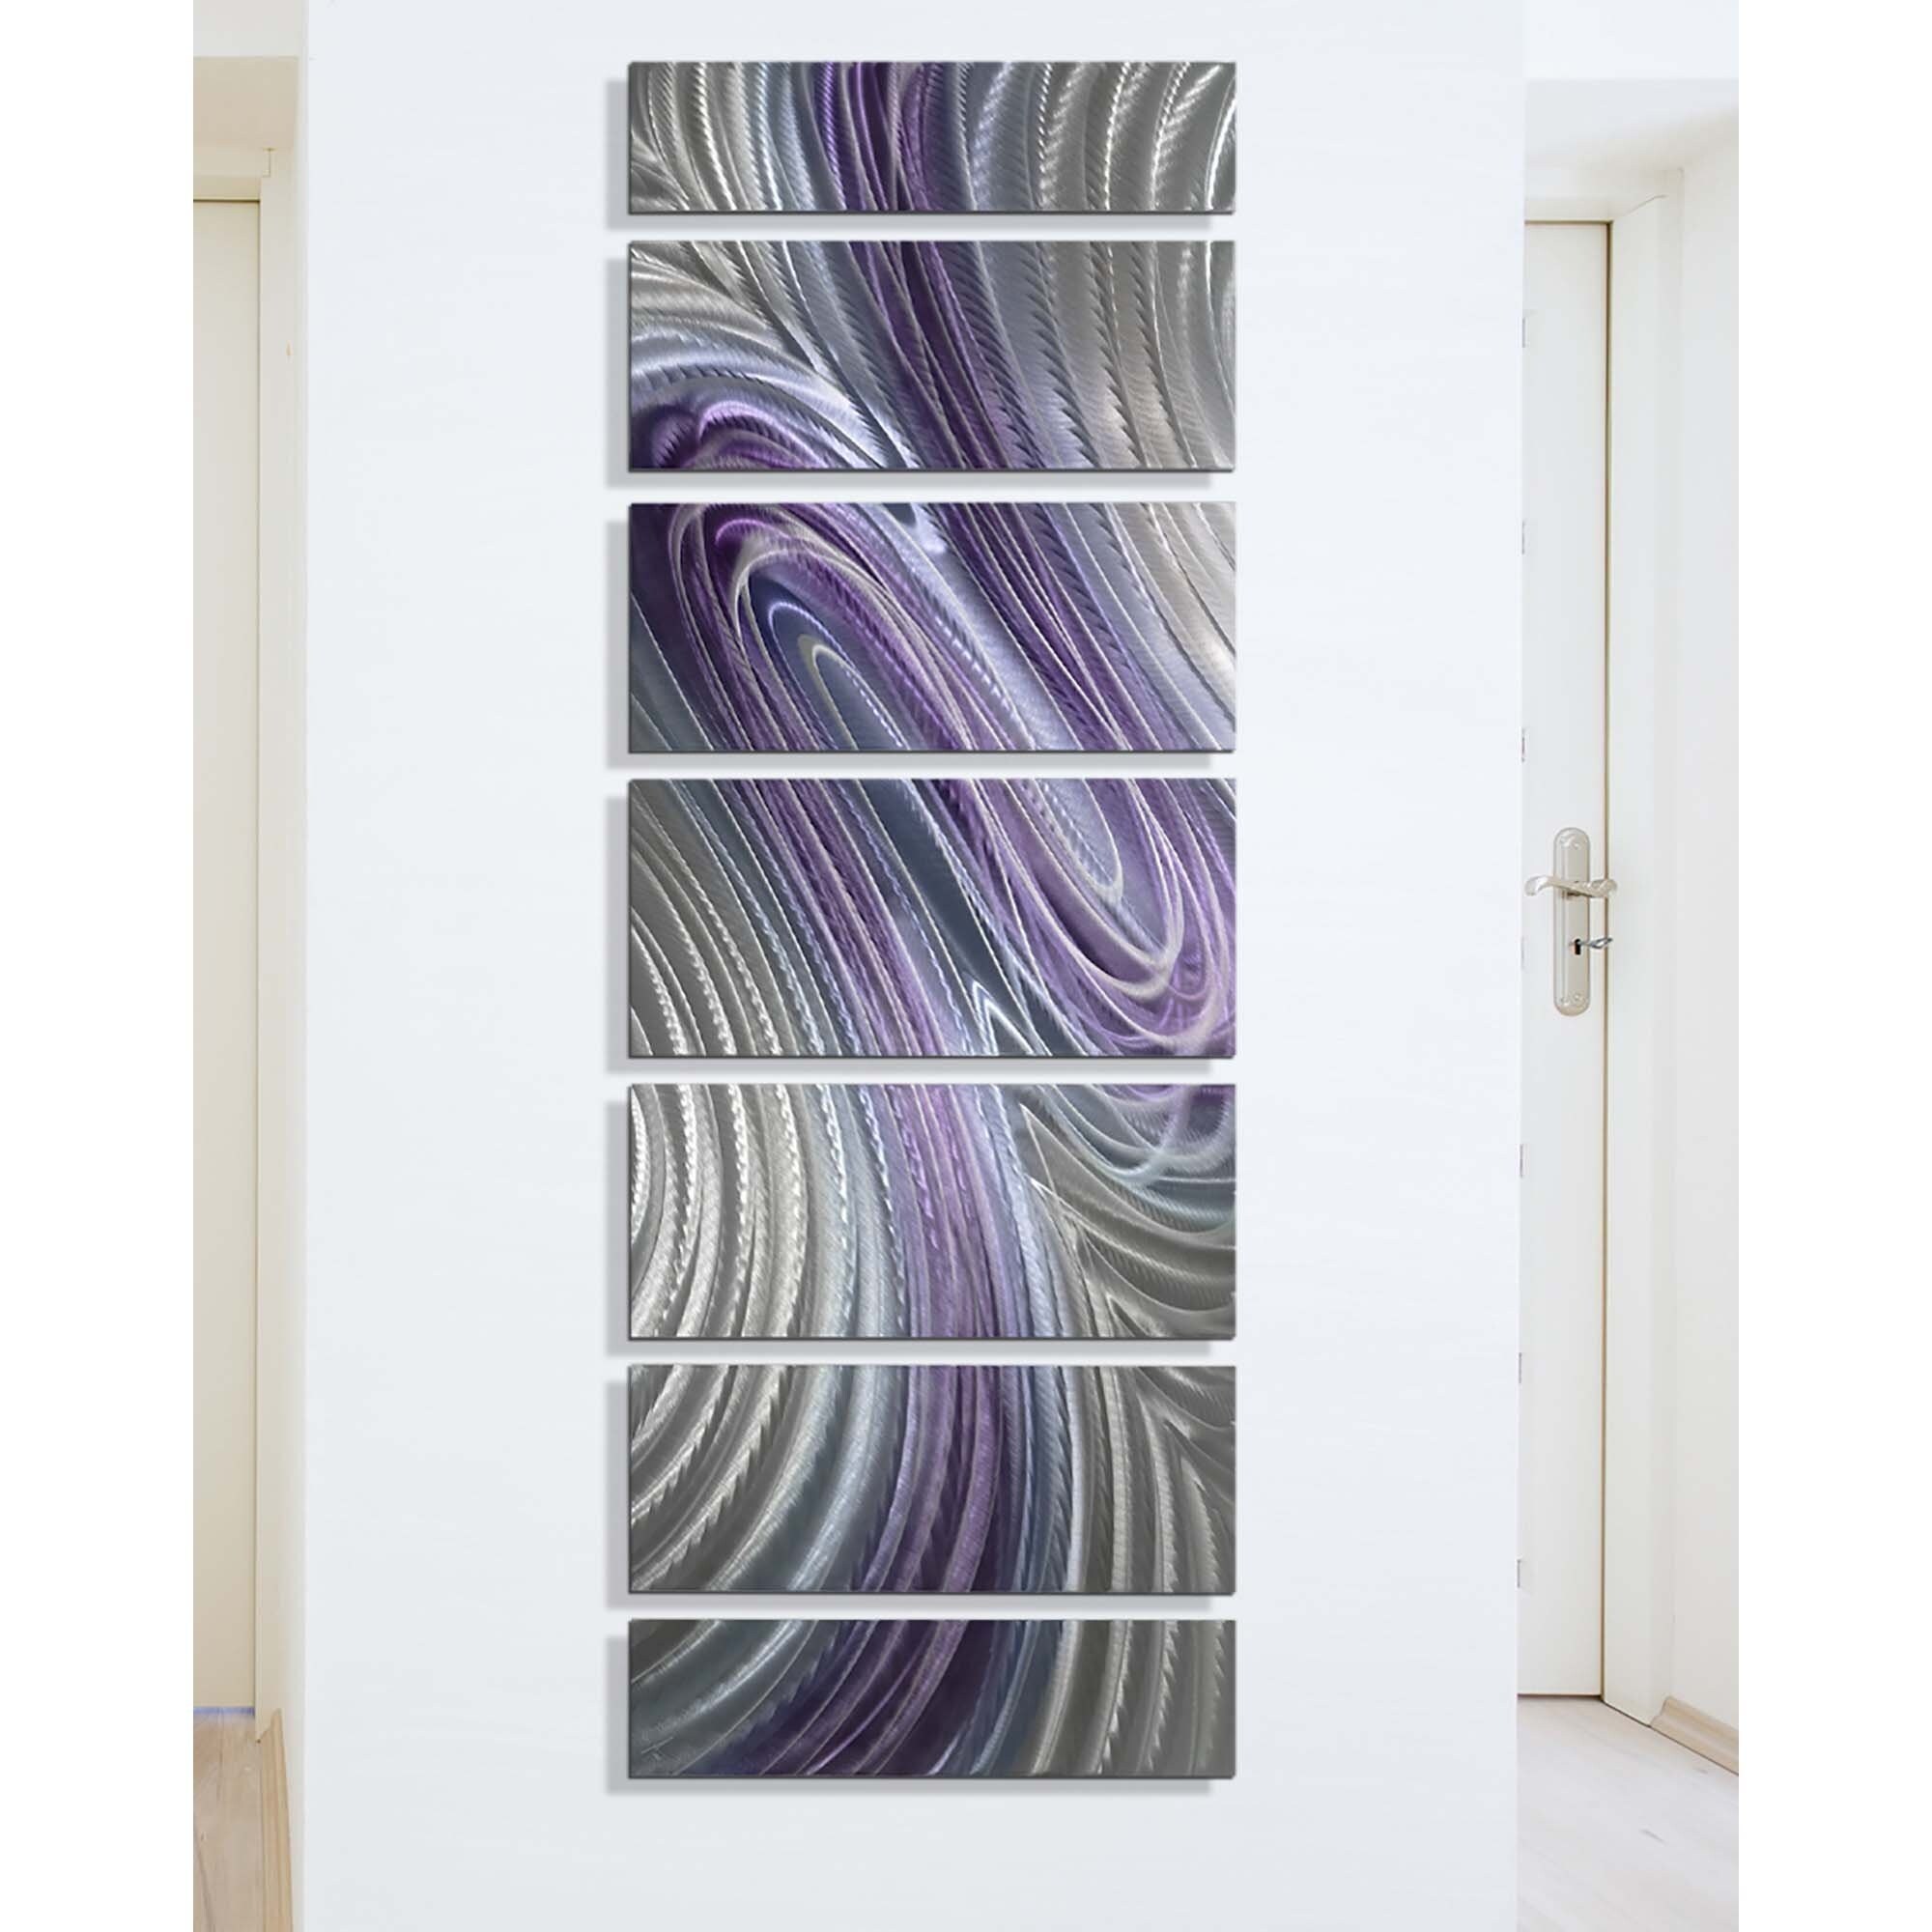 Statements2000 3D Metal Wall Art Panels Painting Abstract Silver Gold Purple Decor by Jon Allen - Wild Imagination